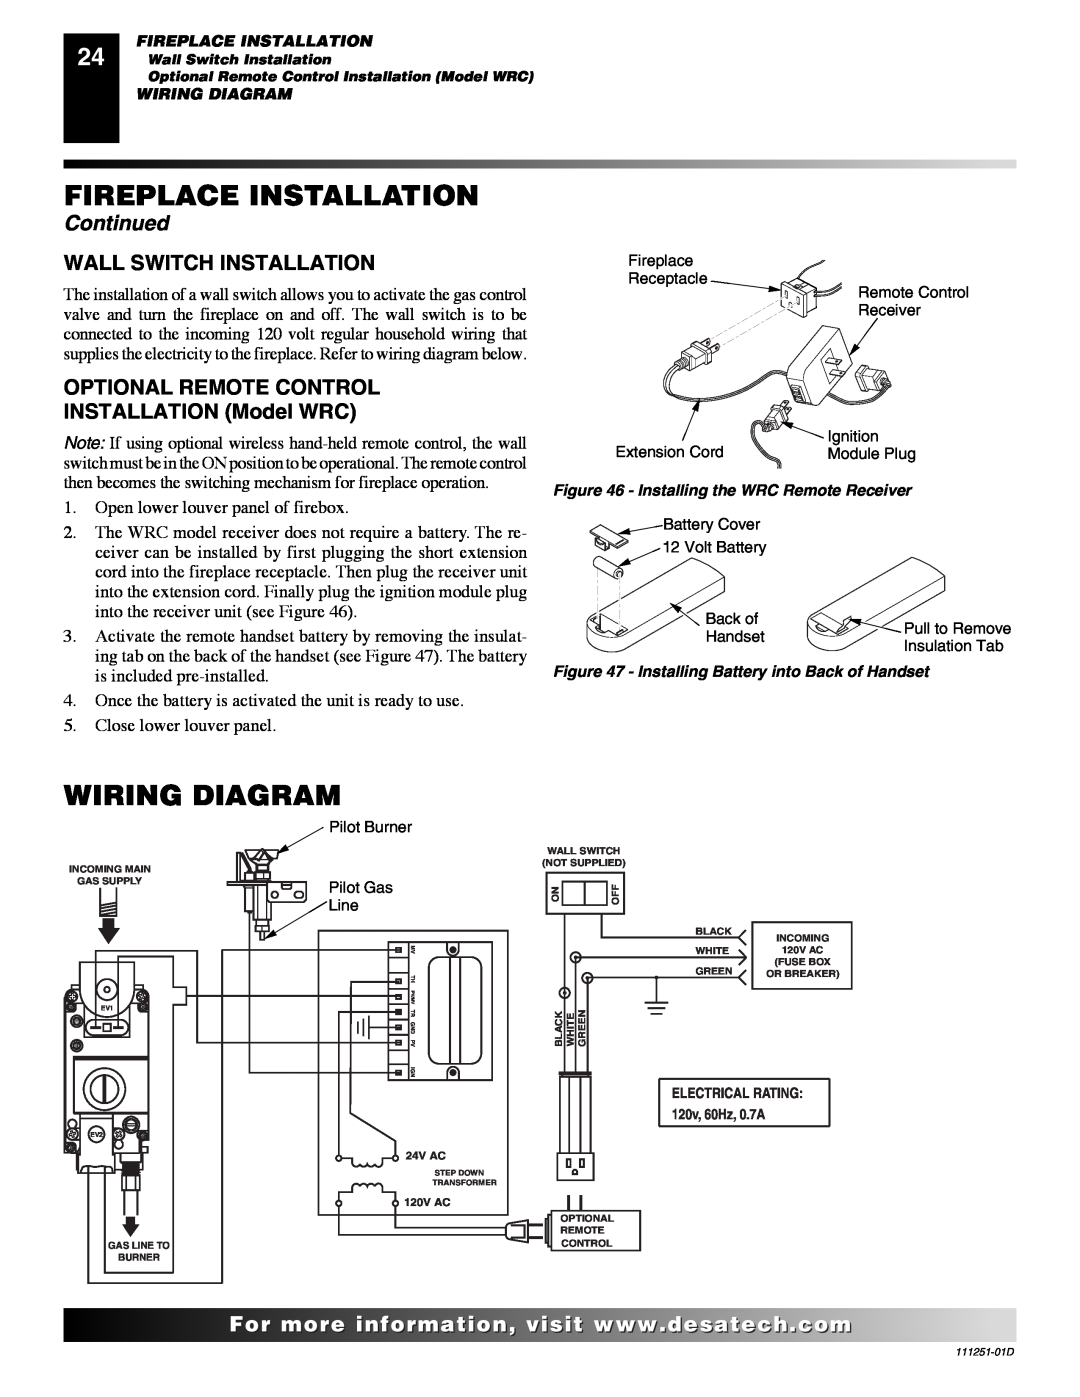 Desa (V)T36EPA SERIES, (V)T36ENA SERIES Wiring Diagram, Fireplace Installation, Continued, Wall Switch Installation 